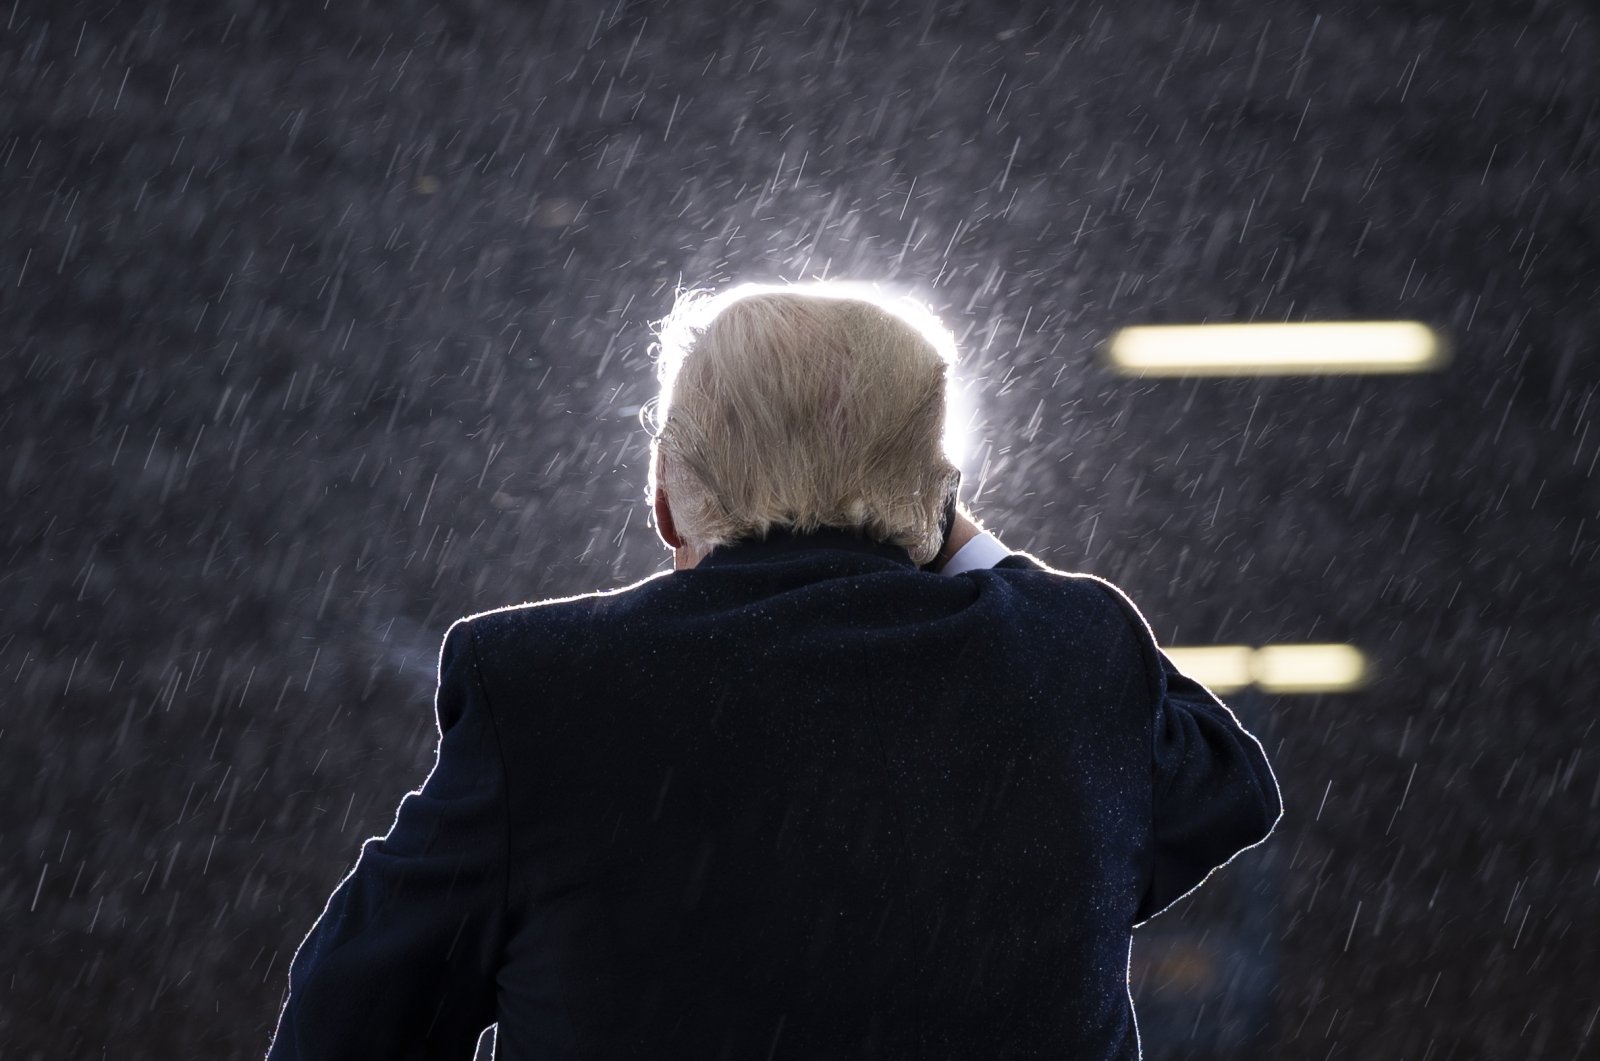 President Donald Trump speaks in the rain during a campaign rally at Capital Region International Airport in Lansing, Michigan, on Oct. 27, 2020. (AP Photo)